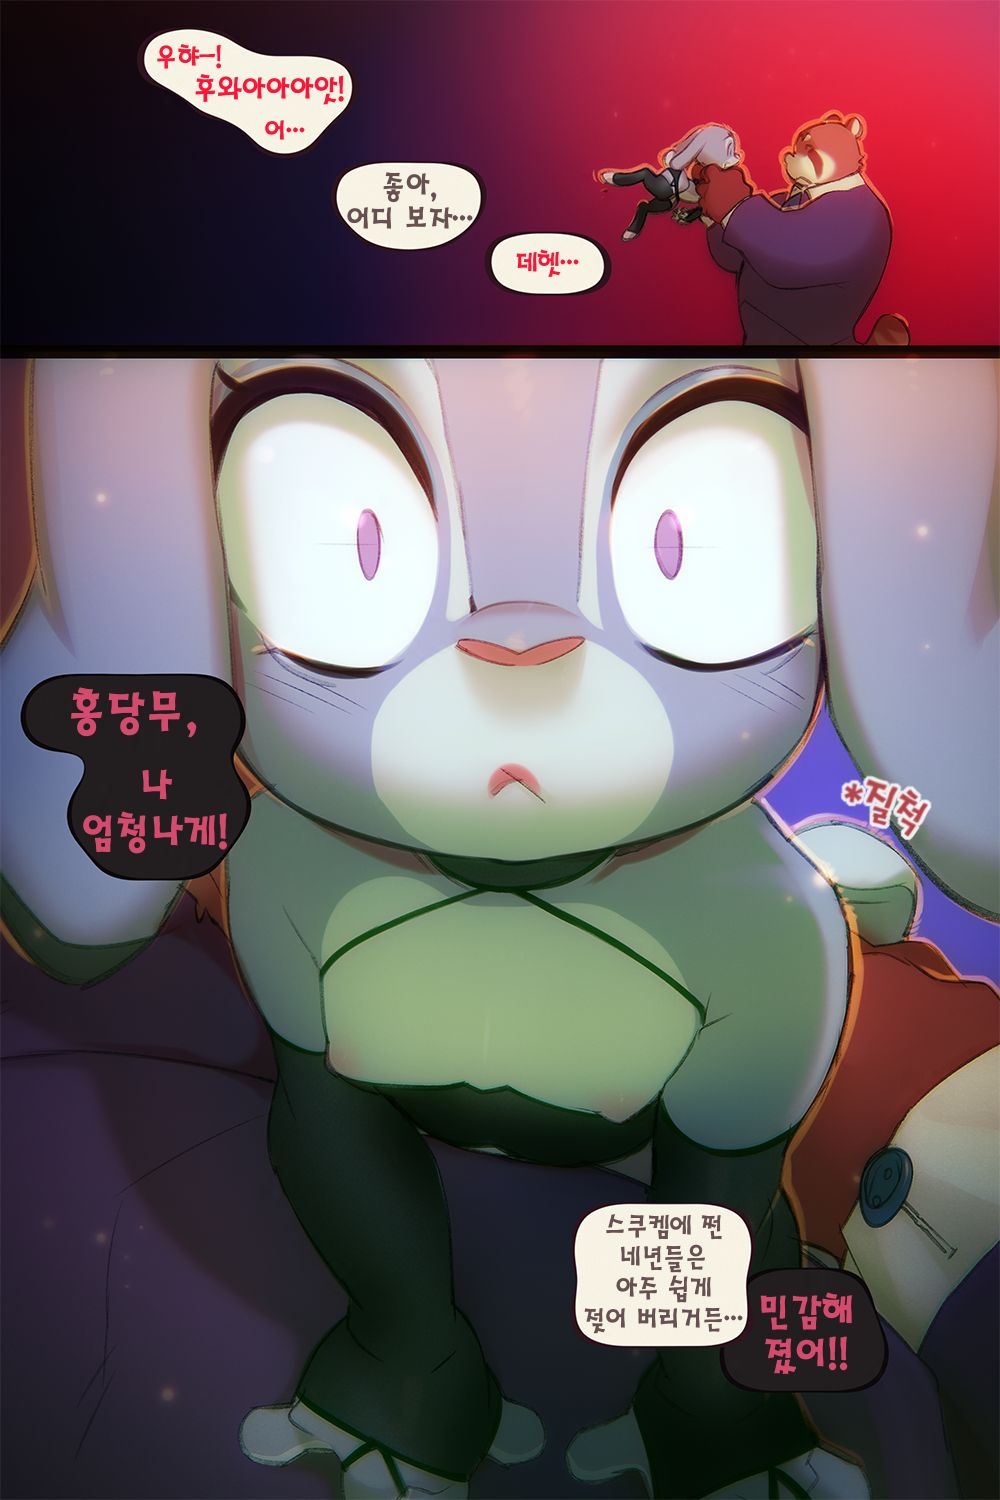 [Doxy] Sweet Sting Part 2: Down The Rabbit Hole | 달콤한 함정수사 2부: 토끼 굴속으로 (Zootopia) [Korean] [Ongoing] 27